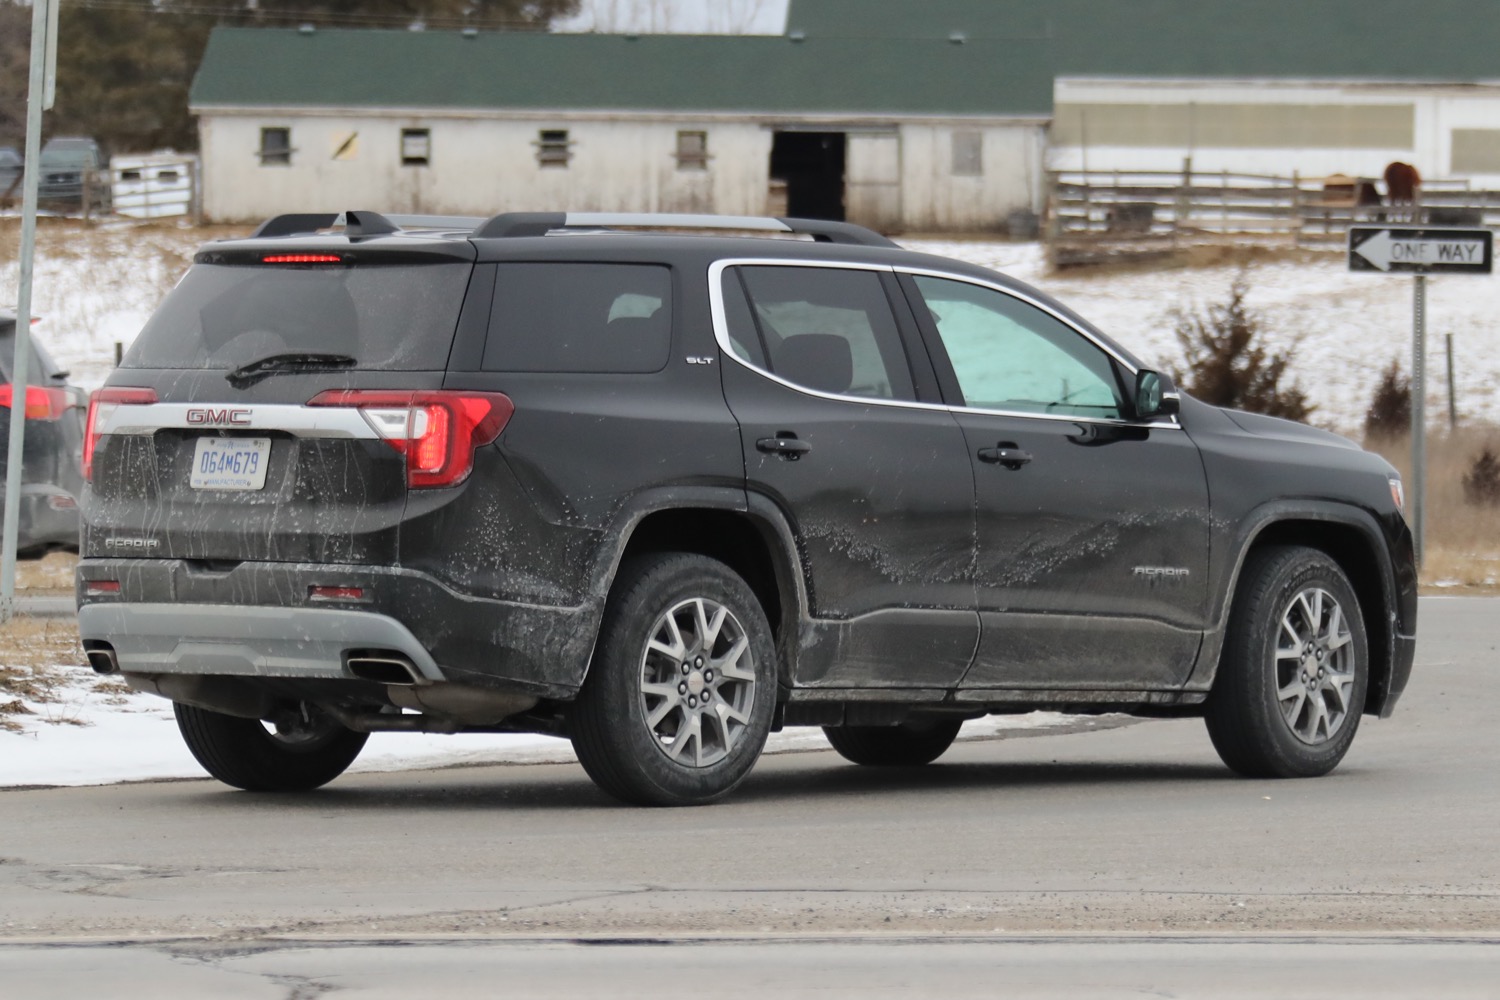 2020 GMC Acadia Facelift In The Wild: Photo Gallery | GM Authority